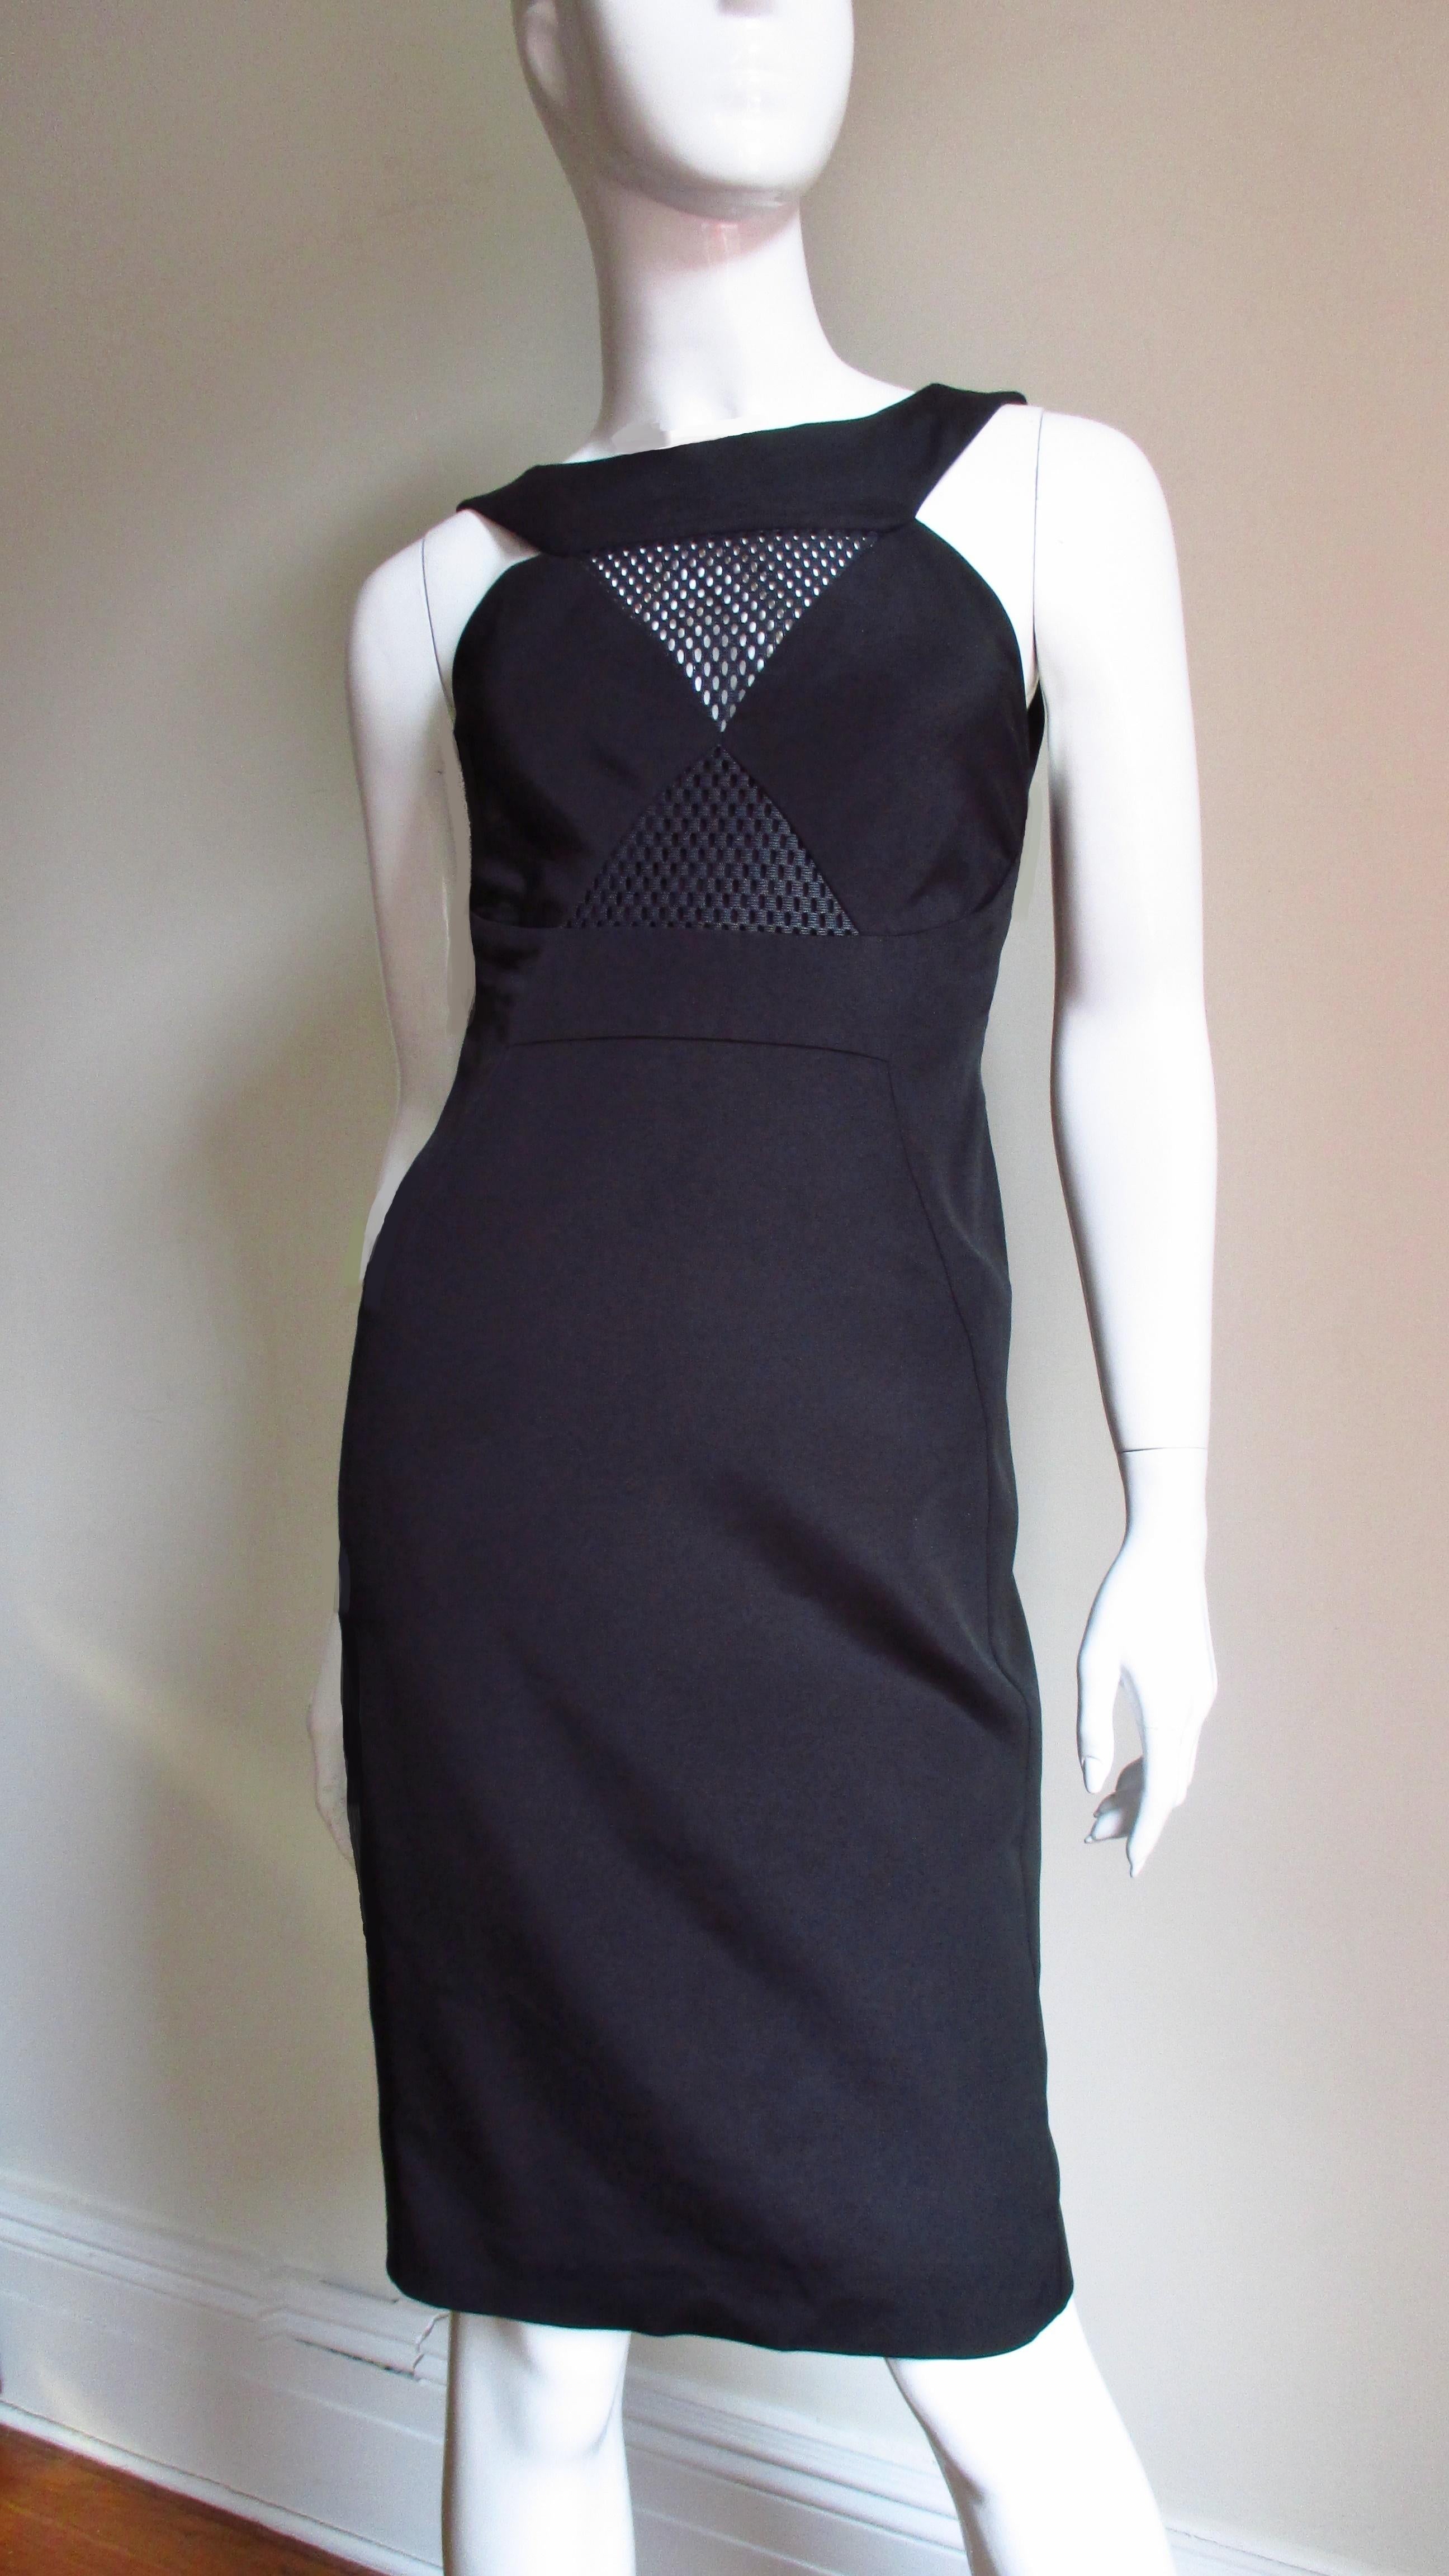 A fabulous stretch bandage fabric bodycon black dress from Gucci.  It has cut in shoulders, a crew neckline with a triangular net covered cut out at the upper chest and elongated diamond shaped mesh covered cut outs at the side waist and framing the